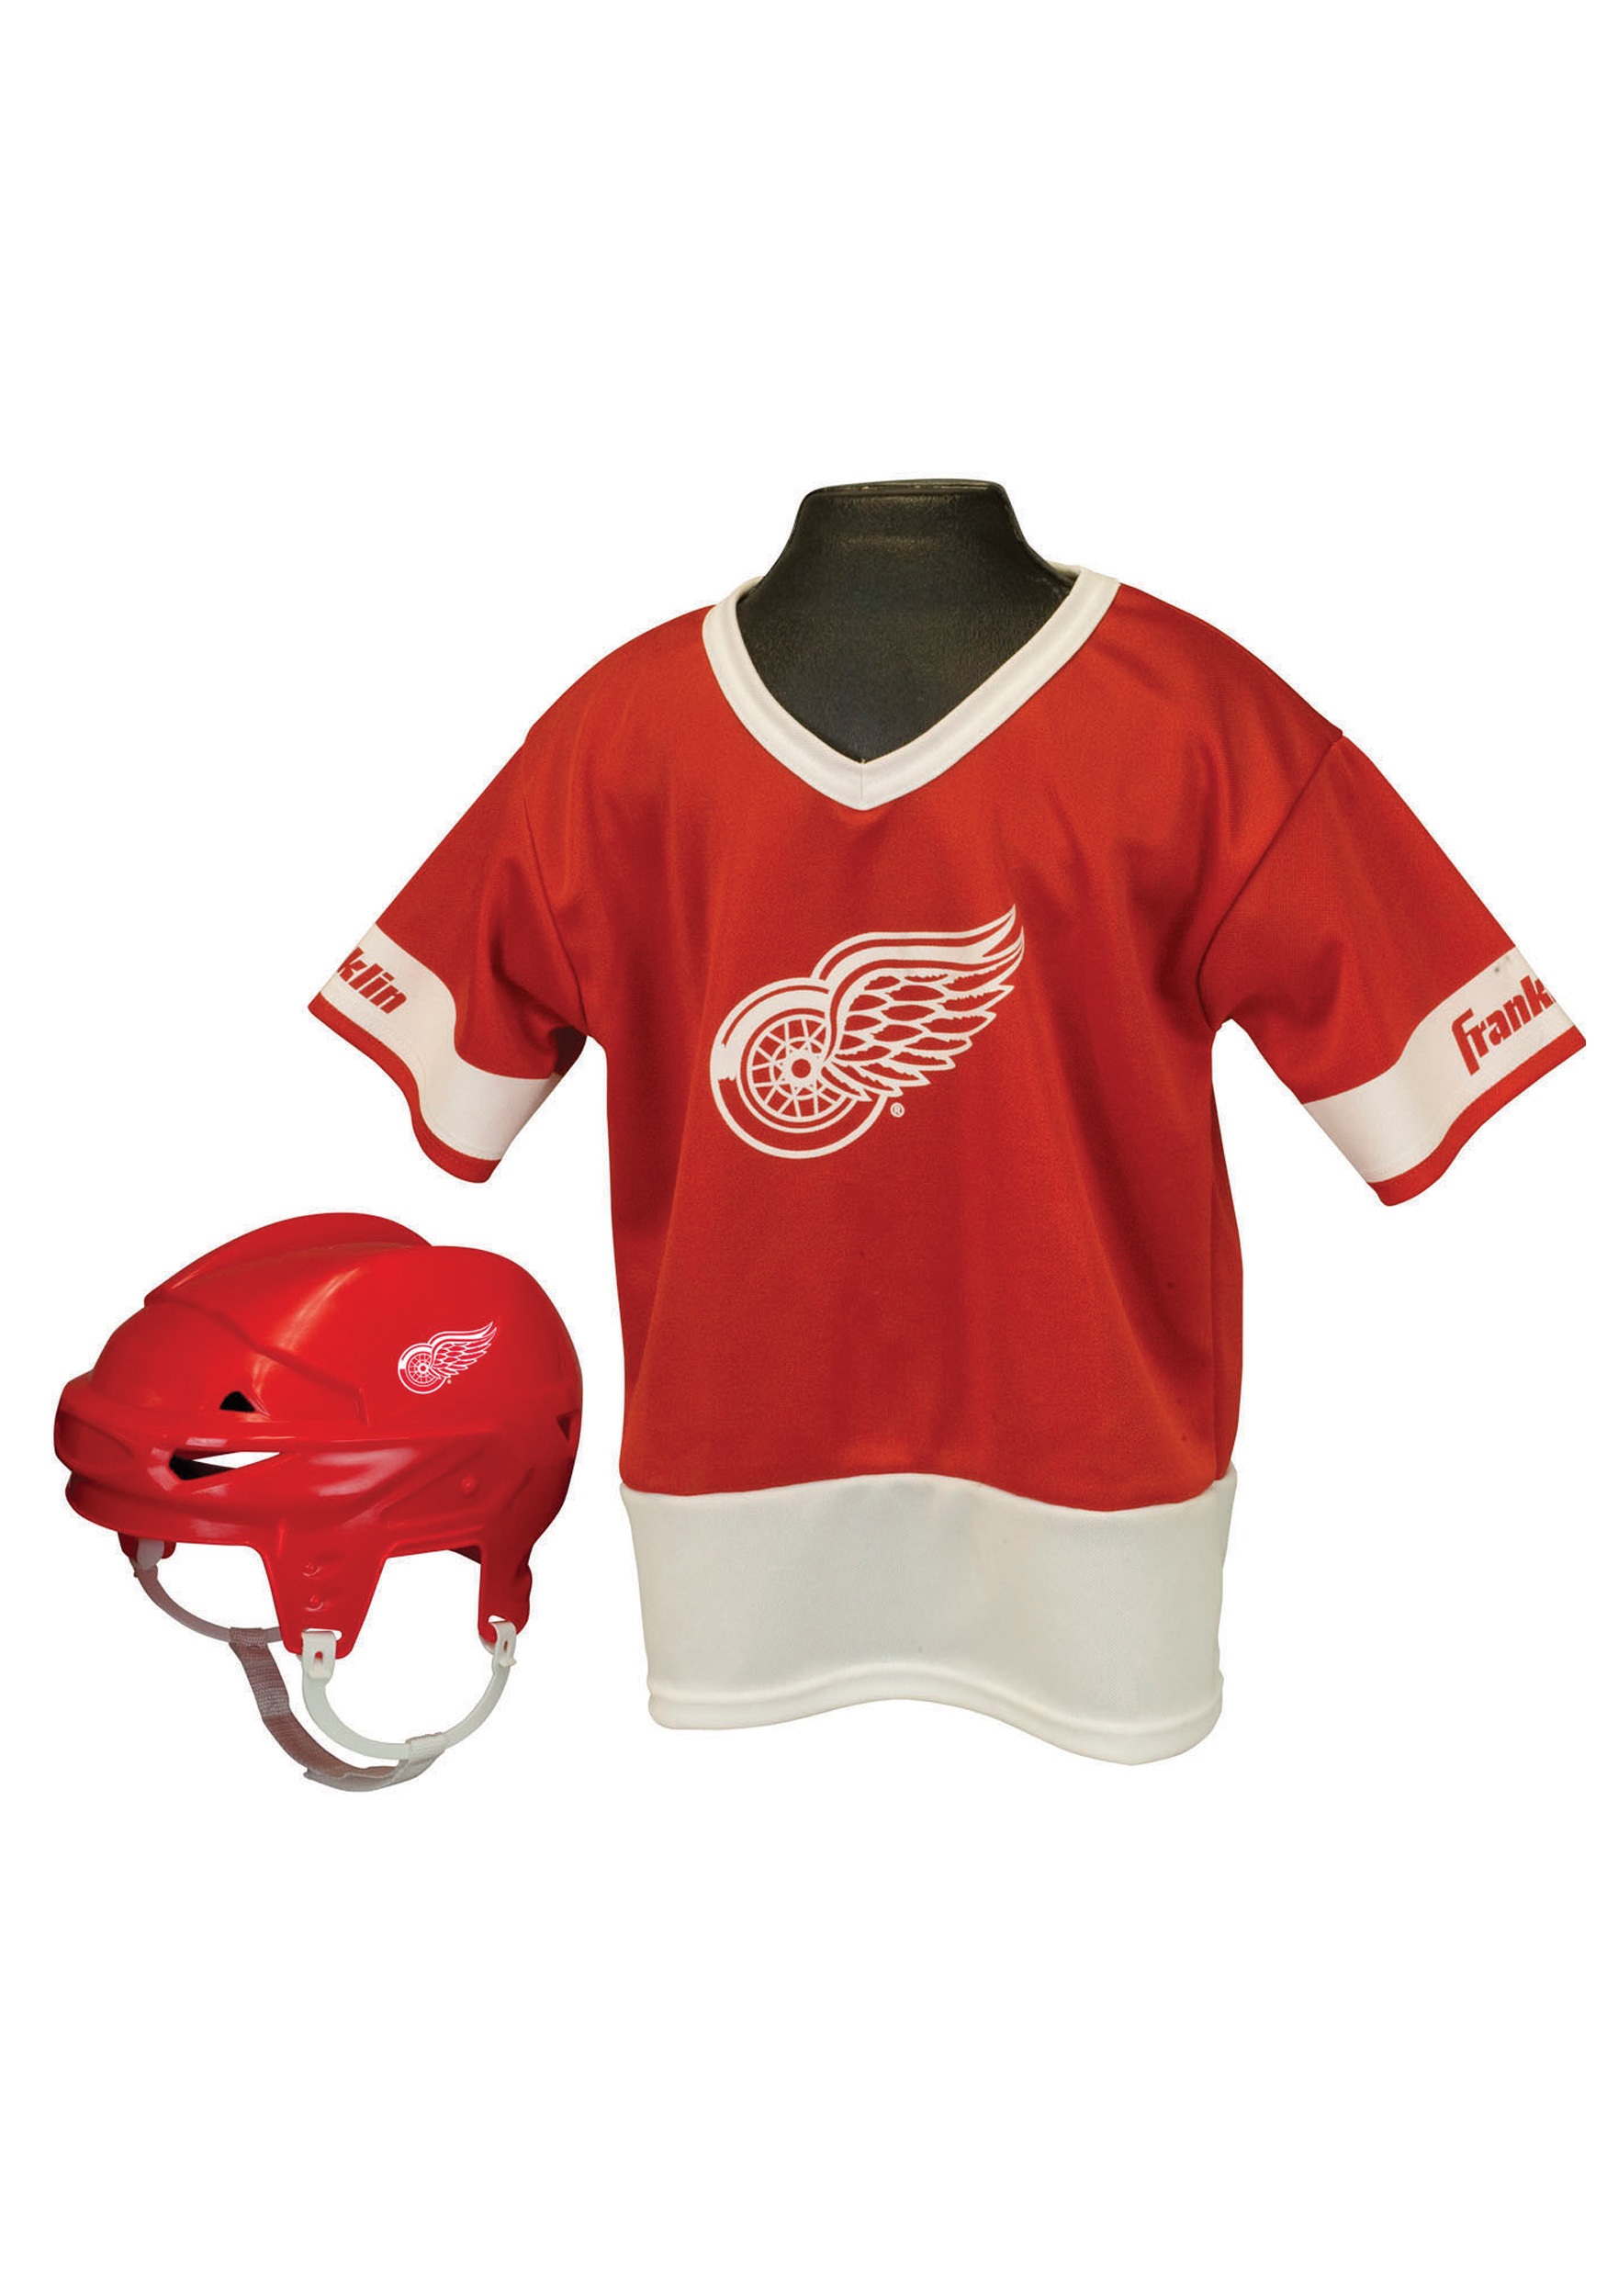 NHL Detroit Red Wings Special Skeleton Costume For Halloween